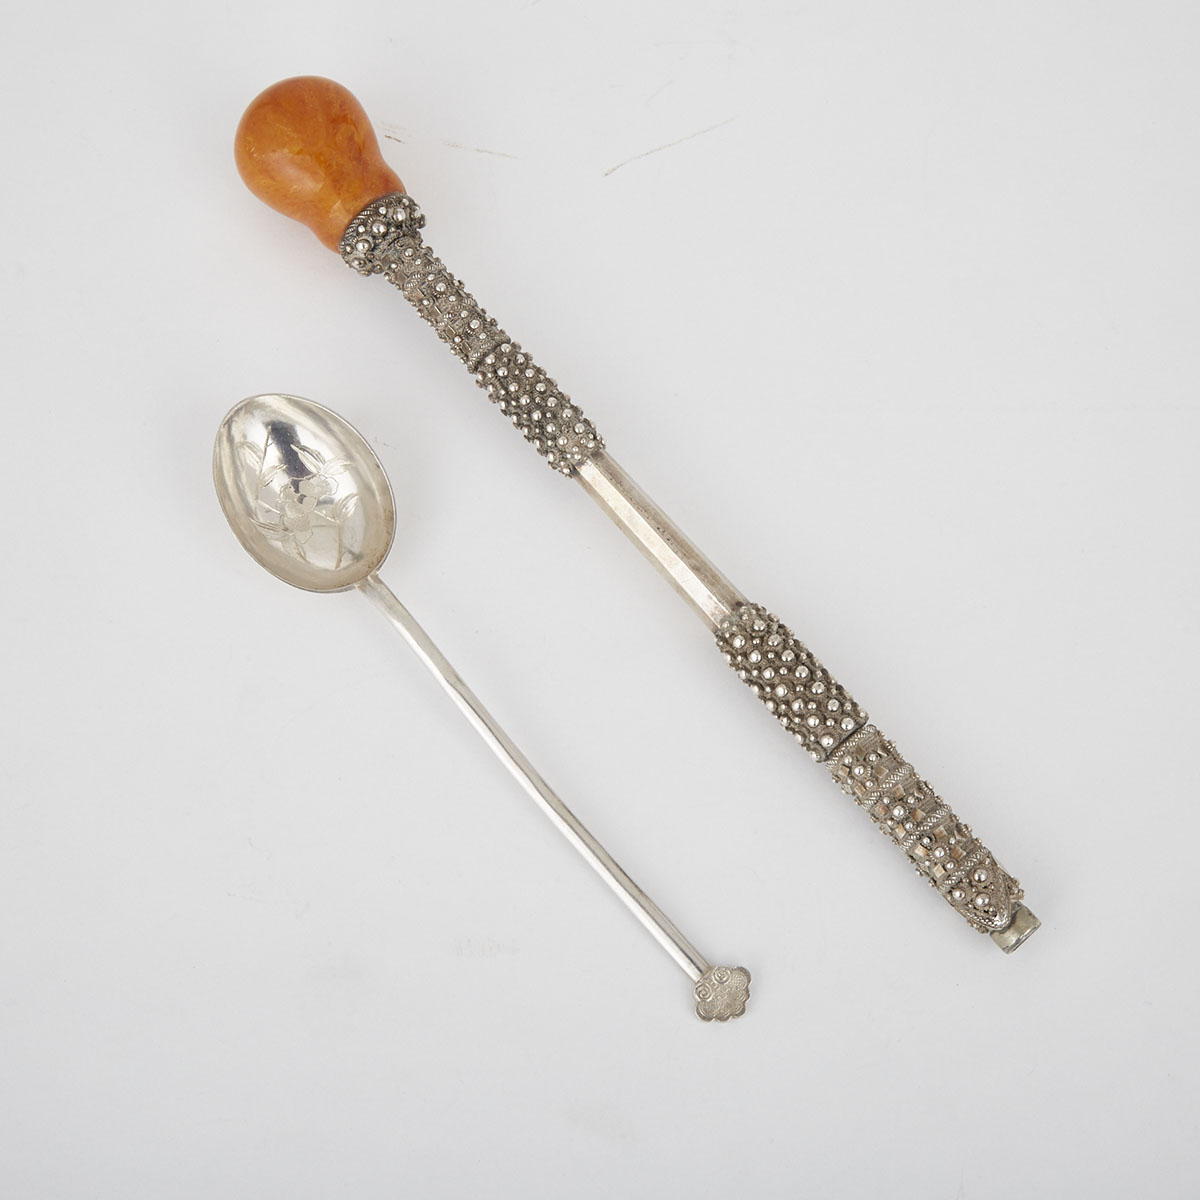 A Silver and Amber Parasol Handle and a Chinese Export Silver Spoon, Early 20th Century